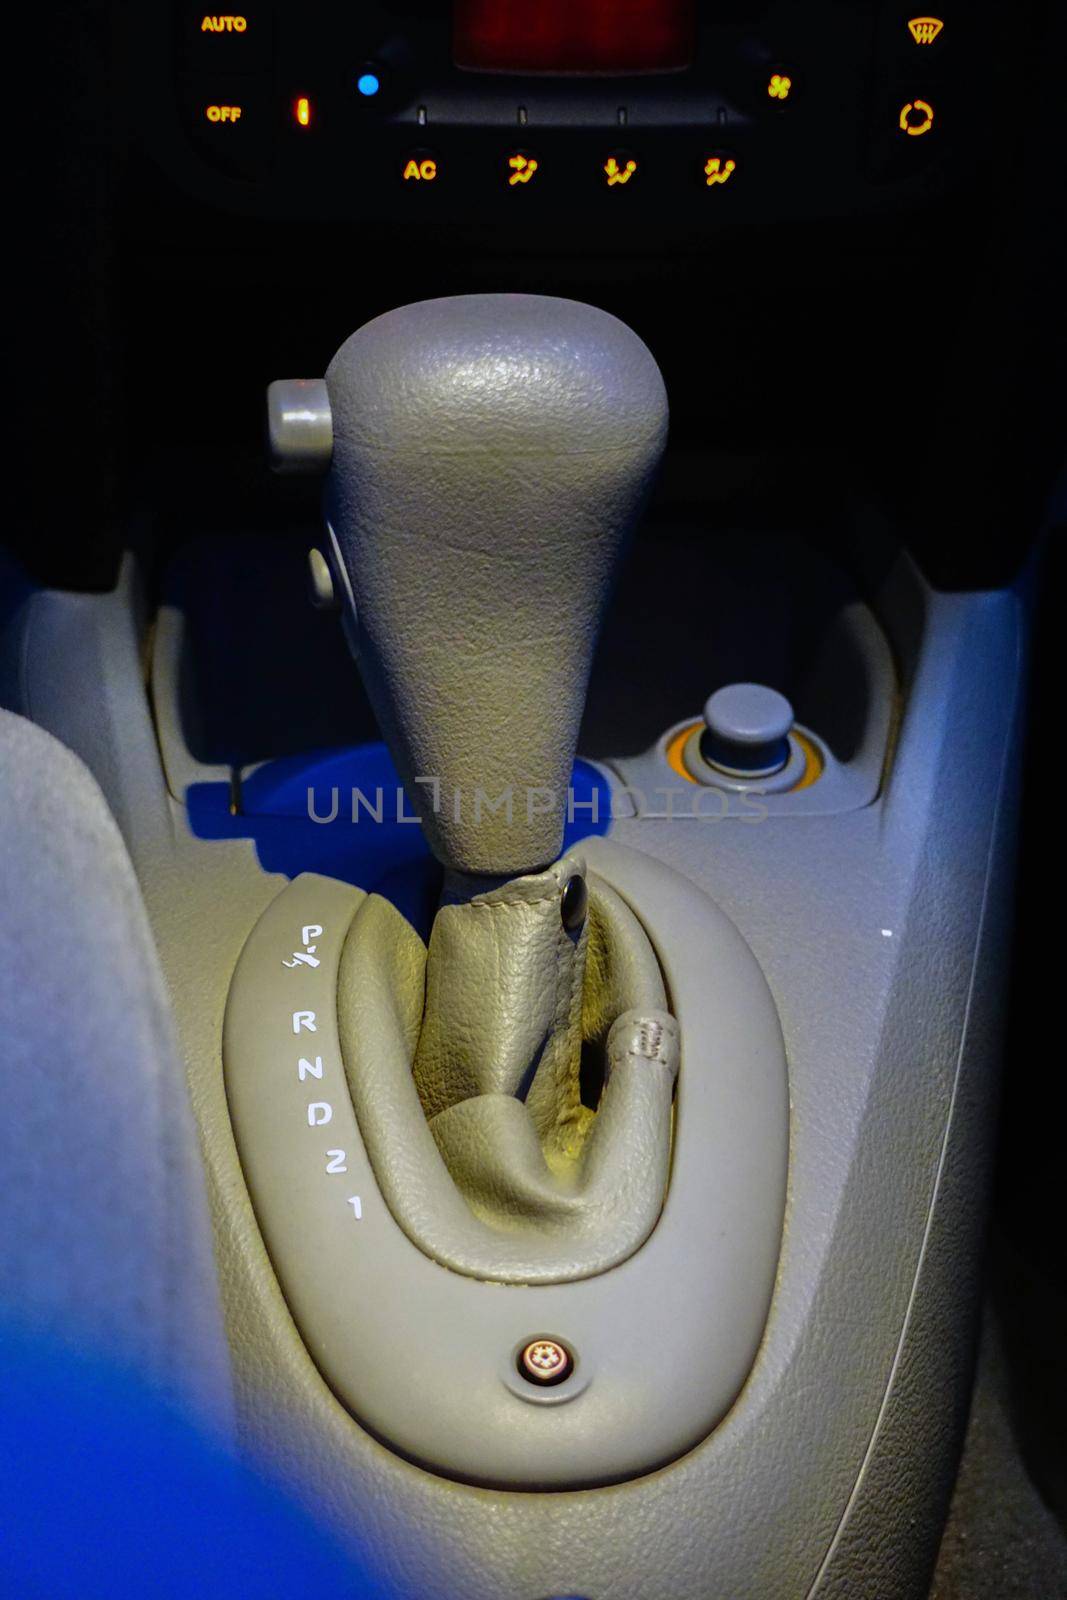 Automatic gear shift lever of a car by tasci